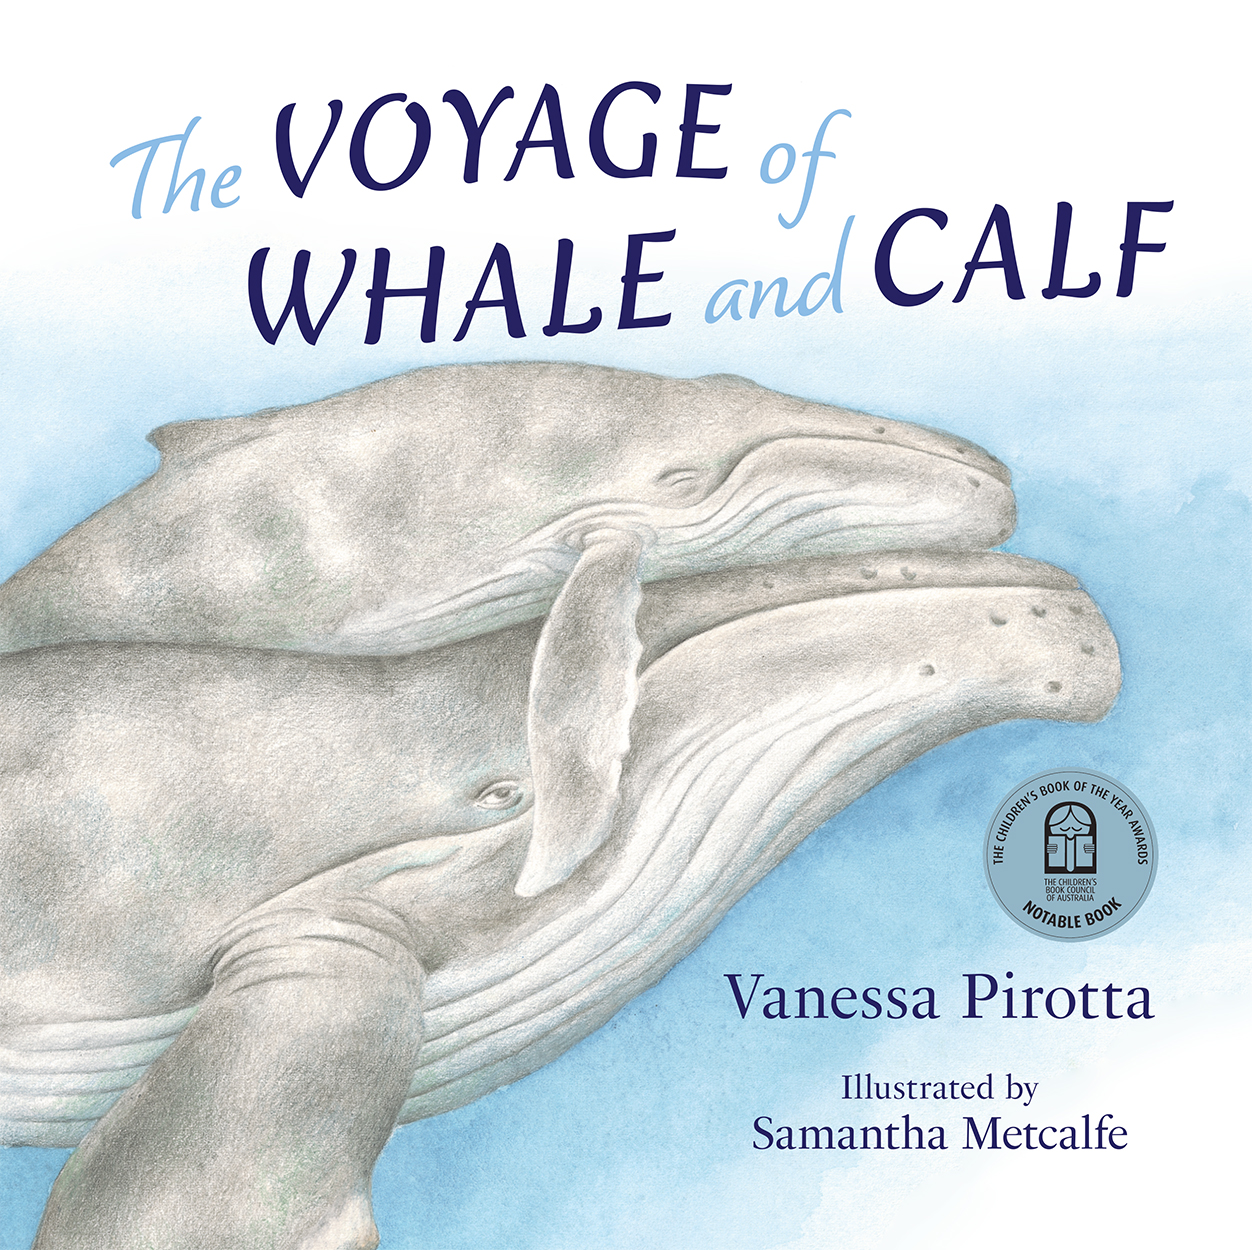 Cover of 'The Voyage of Whale and Calf' featuring an illustration of a humpback whale calf resting on top of its mother in the ocean.